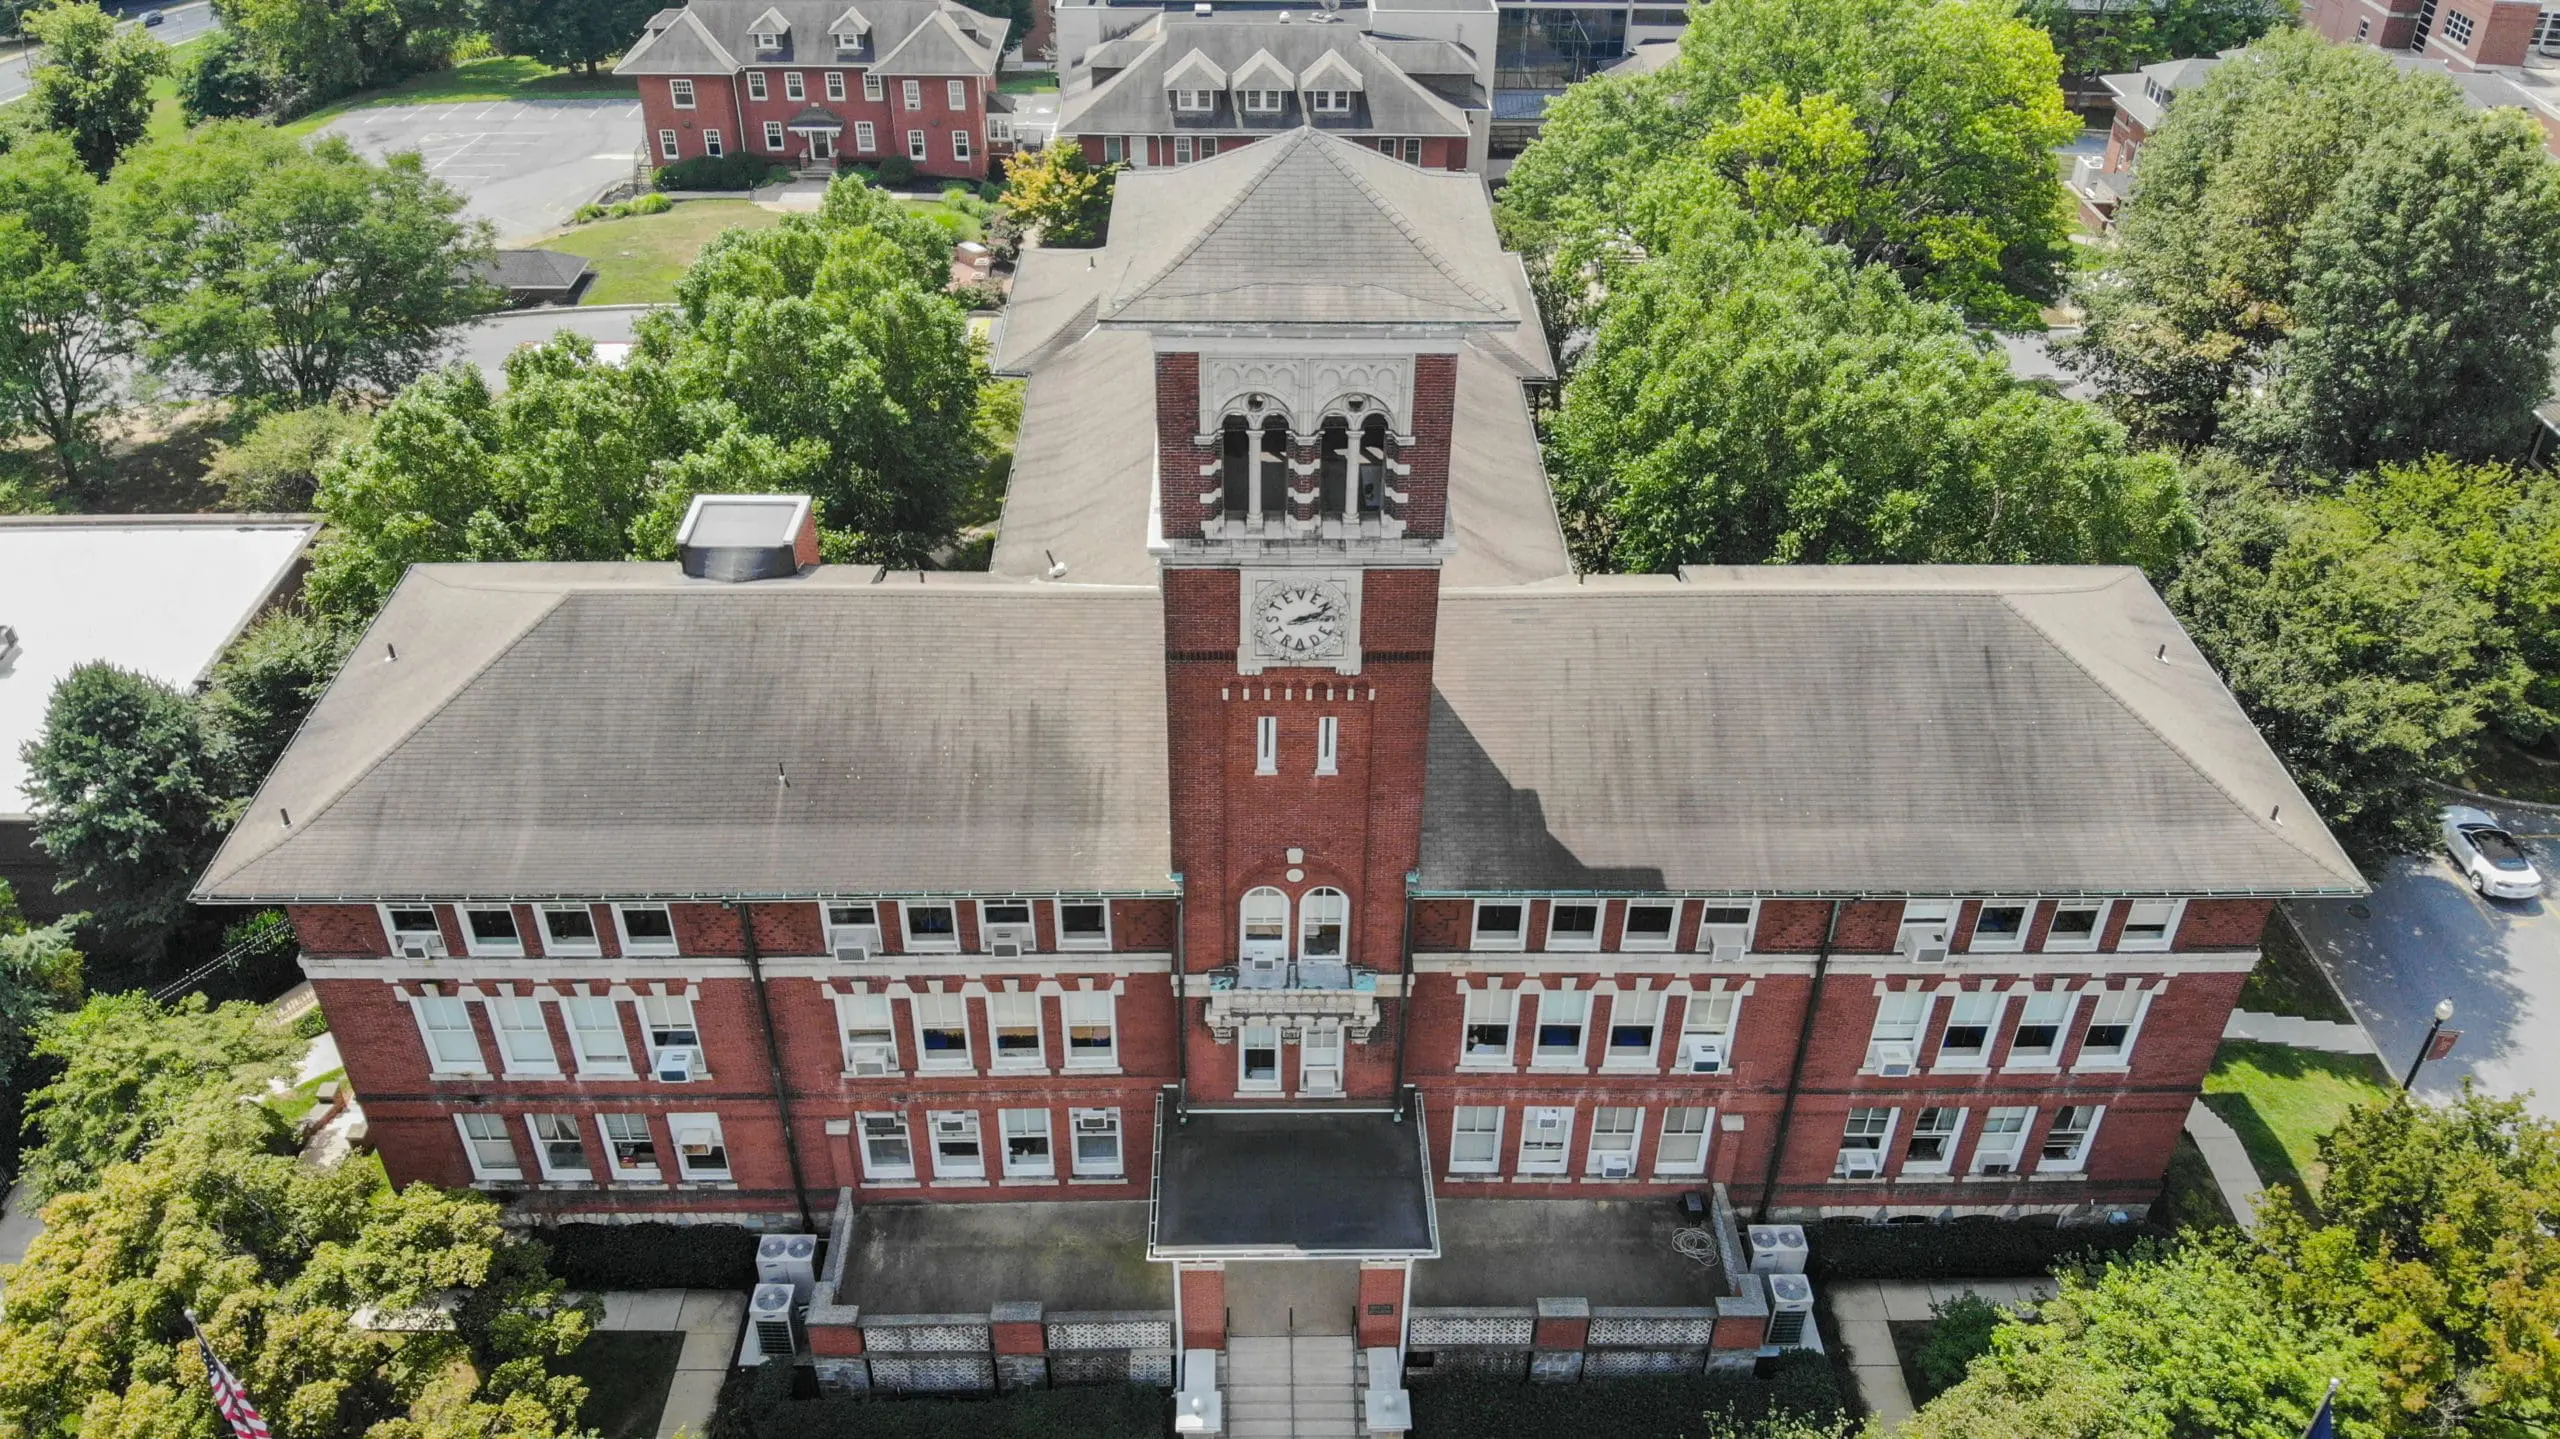 The Mellor building on Thaddeus Stevens College of Technology’s campus